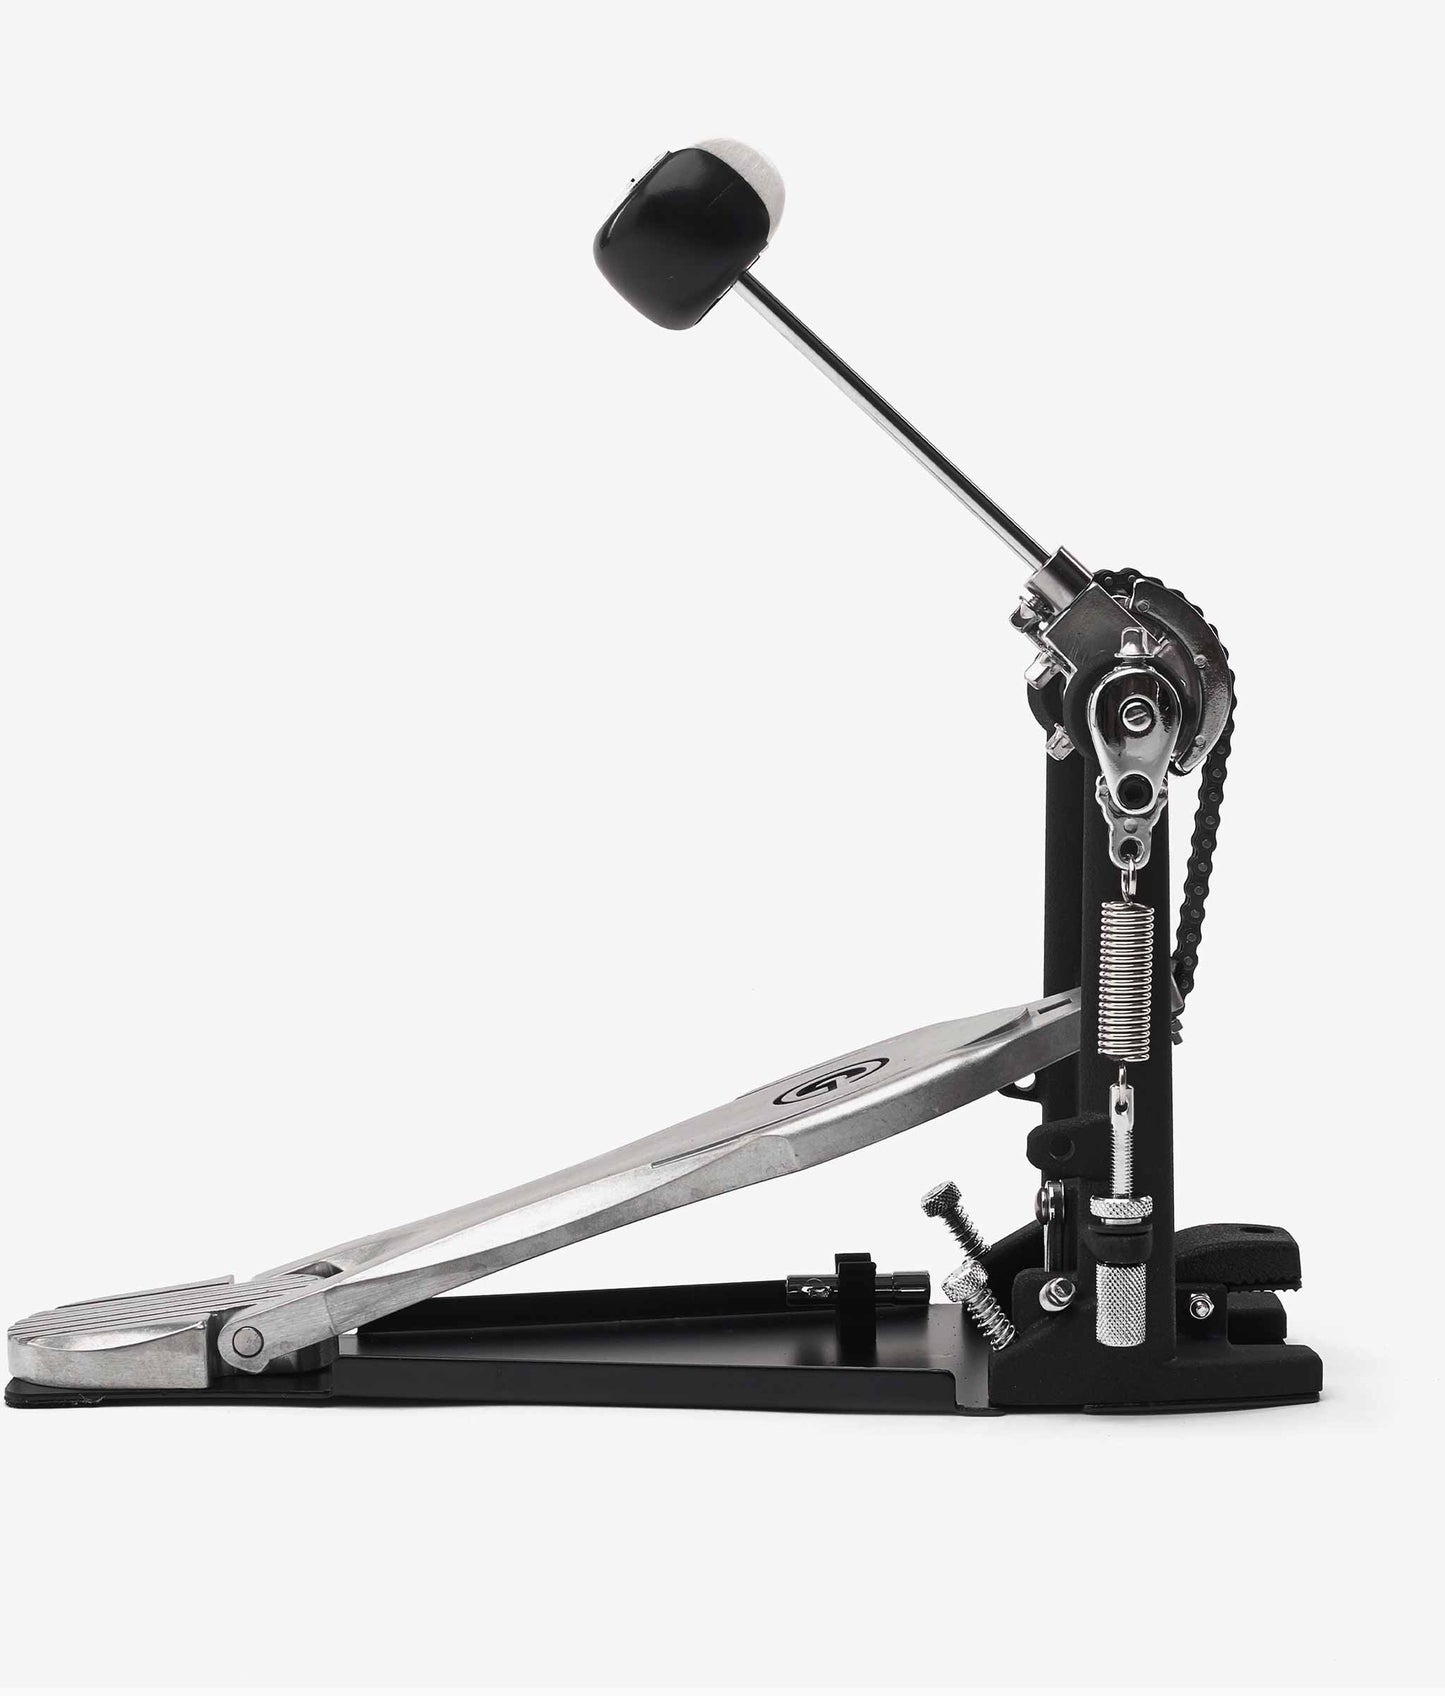  Gibraltar 6711S 6000 Series Double Chain Drive Bass Drum Pedal bass drum pedal